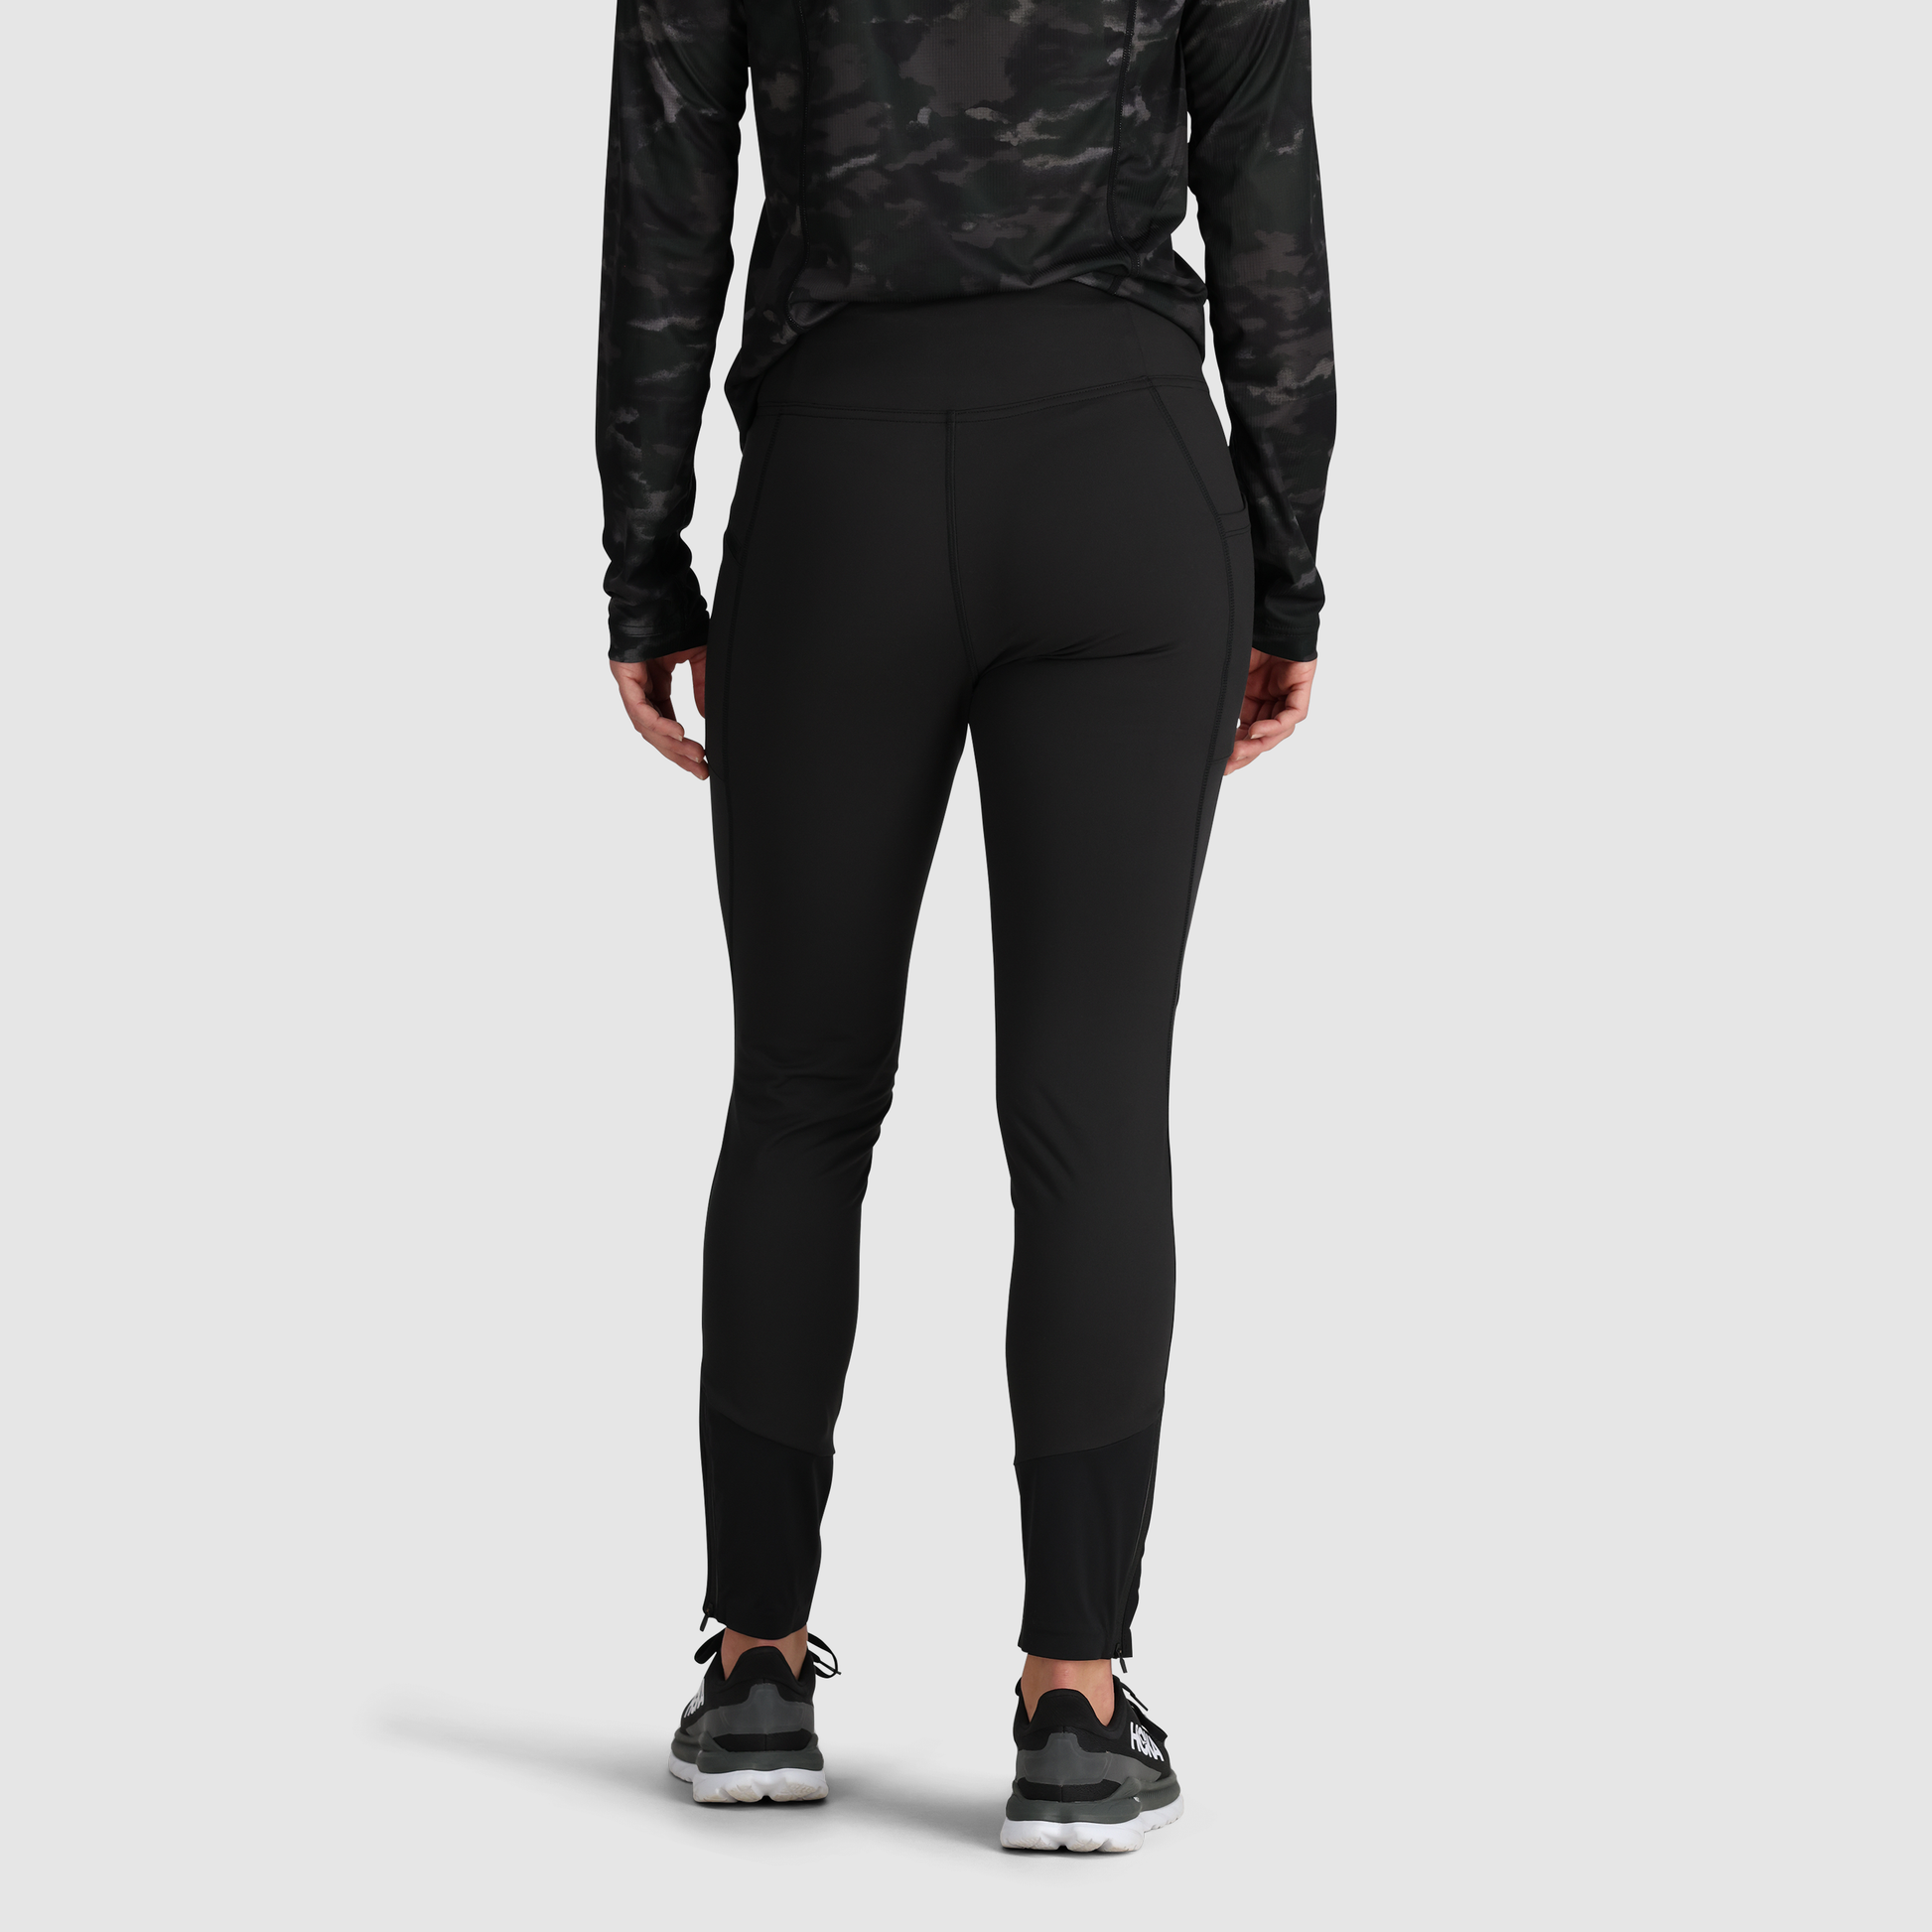 Adidas Black Believe This High-Rise Mesh Tights – The Spot for